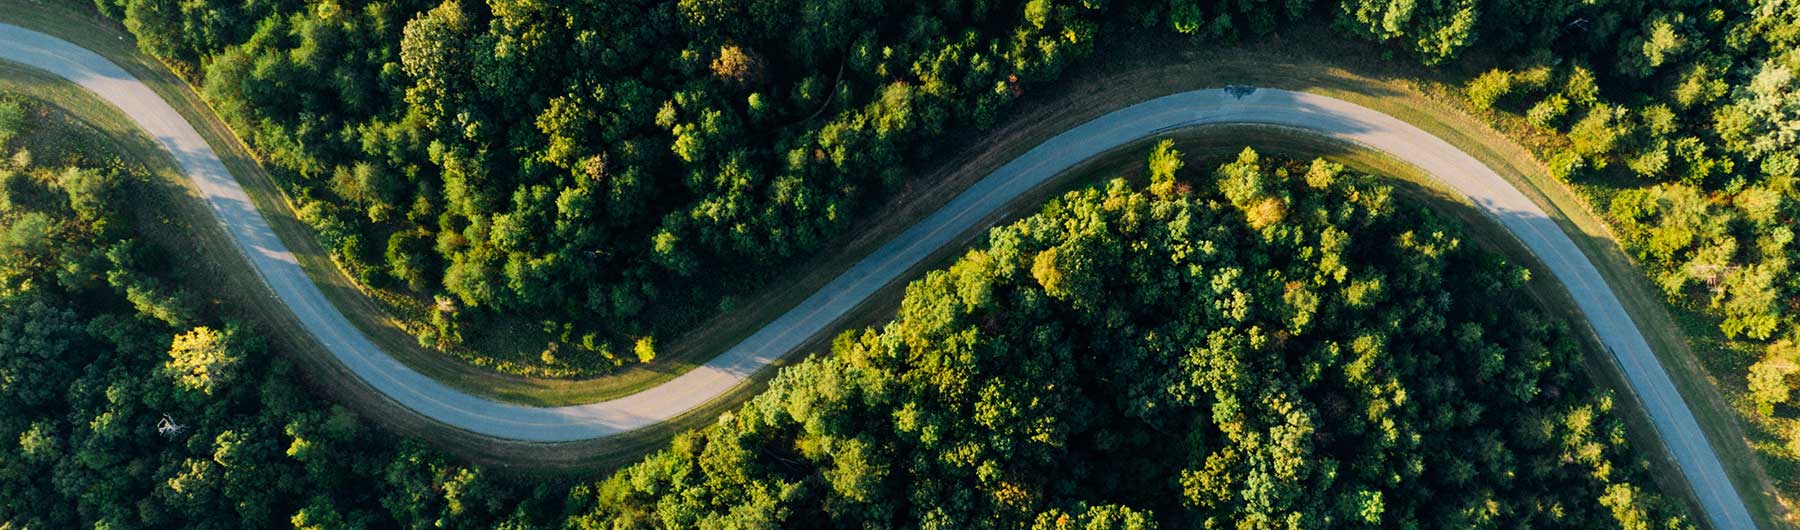 aerial-view-empty-road-forest-1800x530